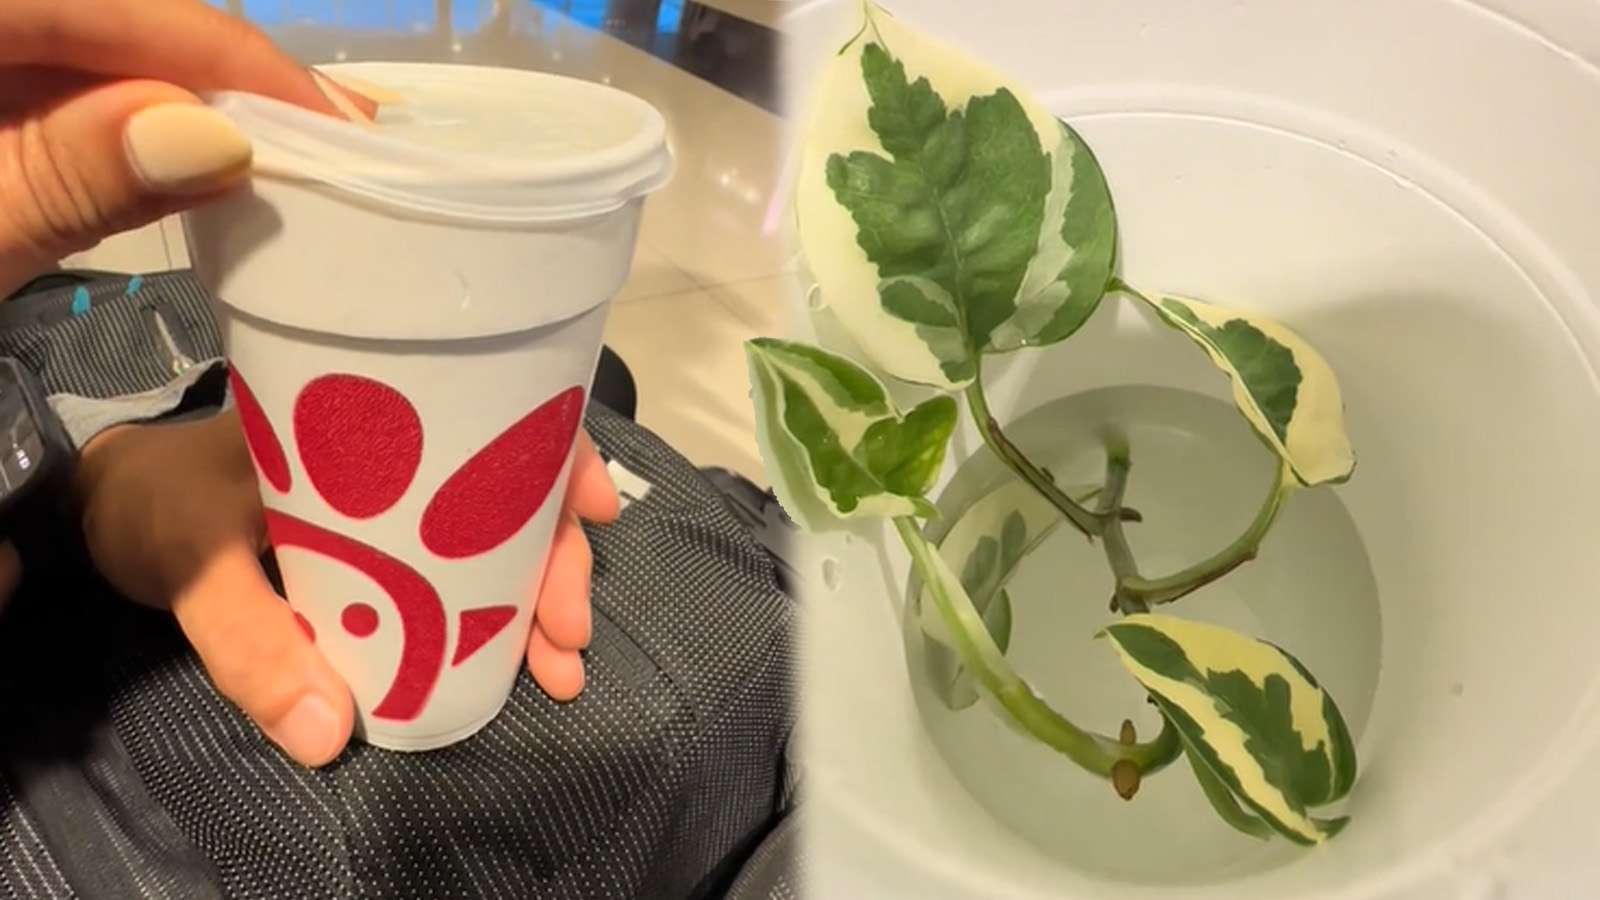 TikTokers spark debate after smuggling plant through airport inside Chick-fil-A cup